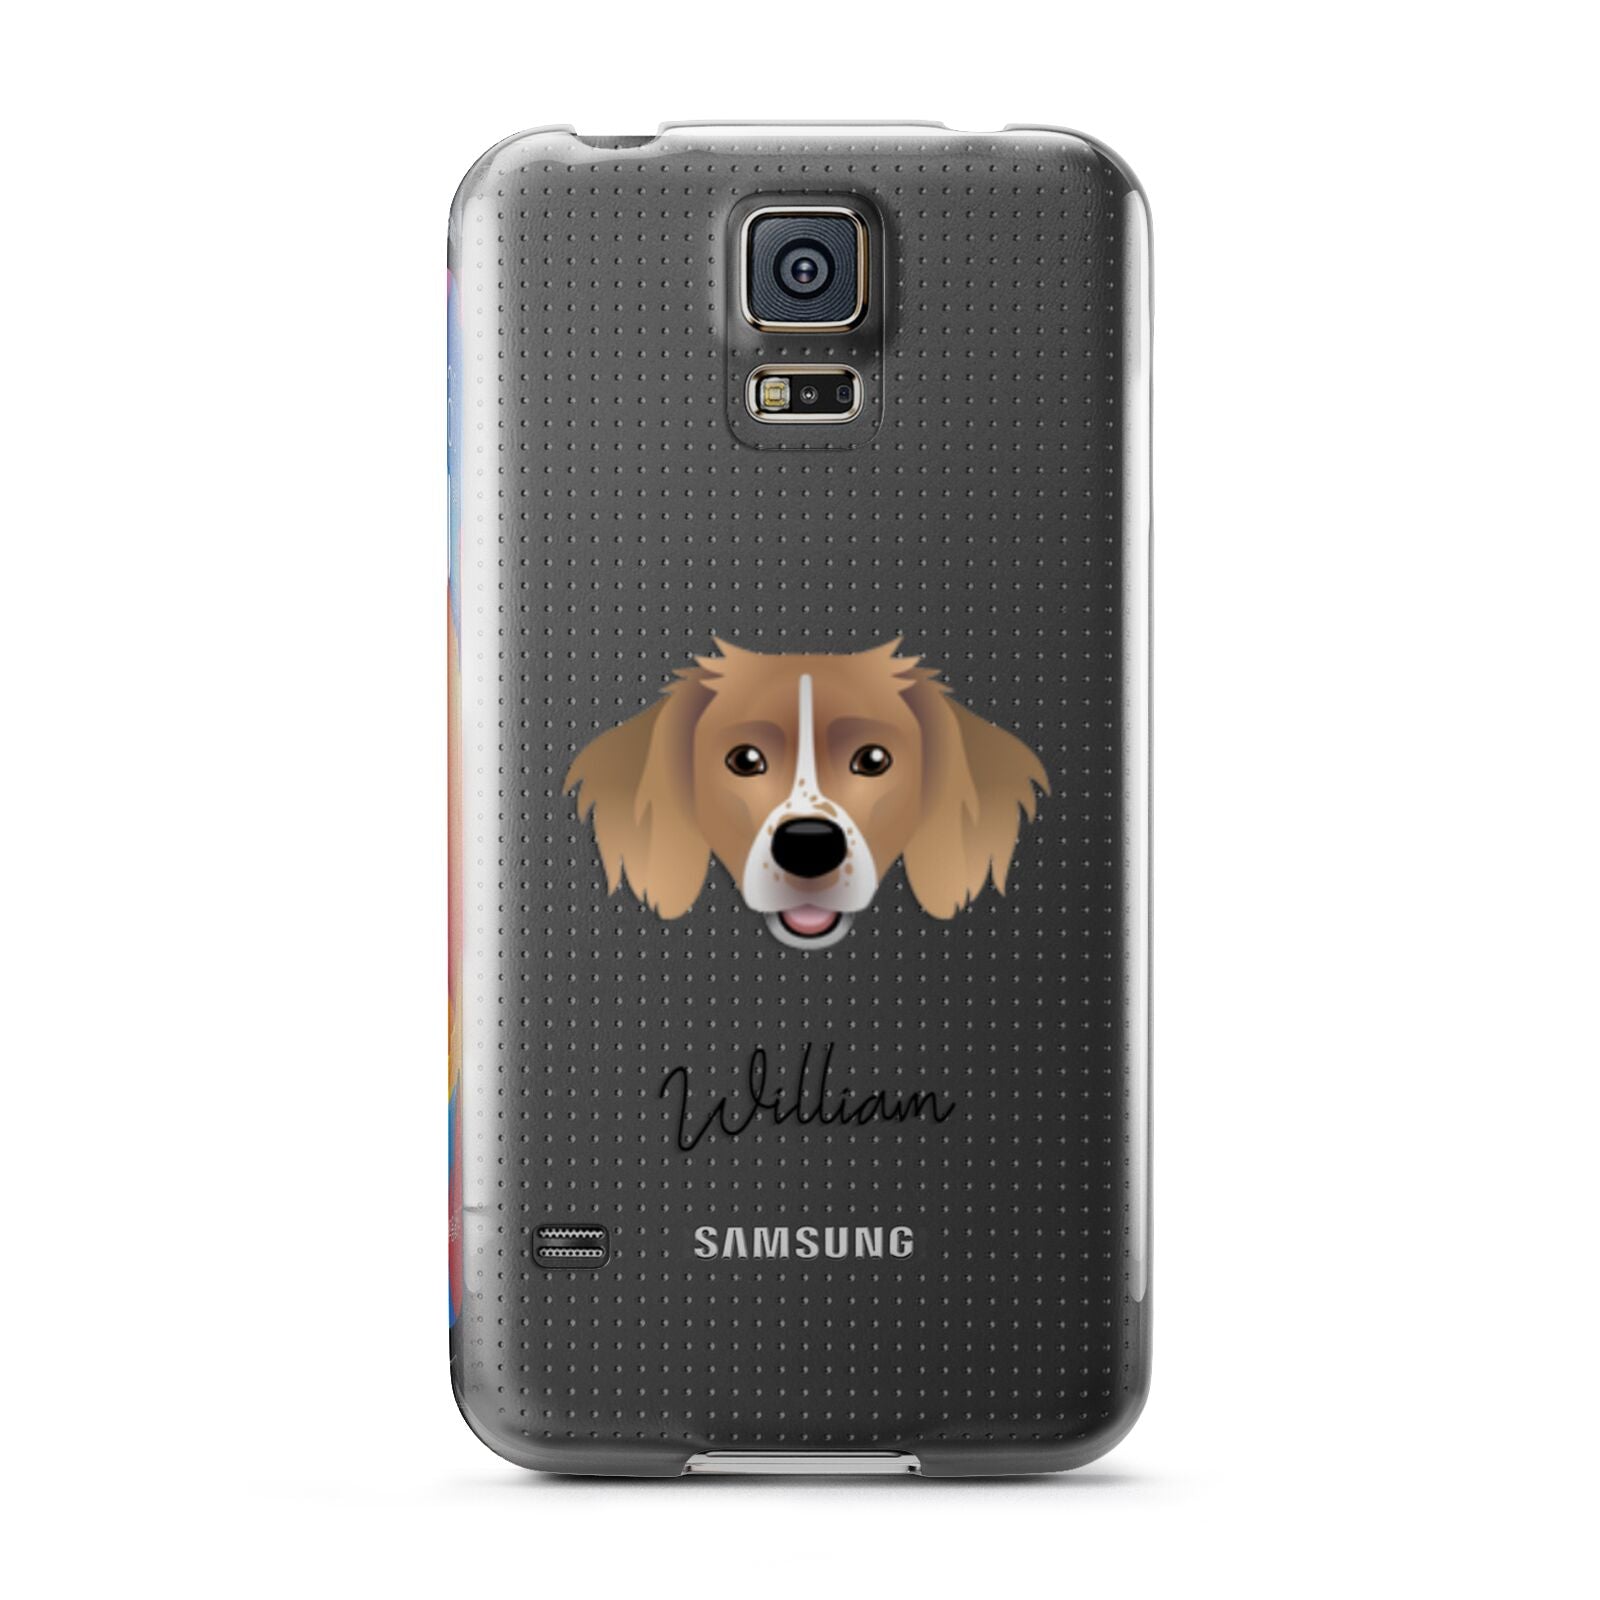 Sprollie Personalised Samsung Galaxy S5 Case